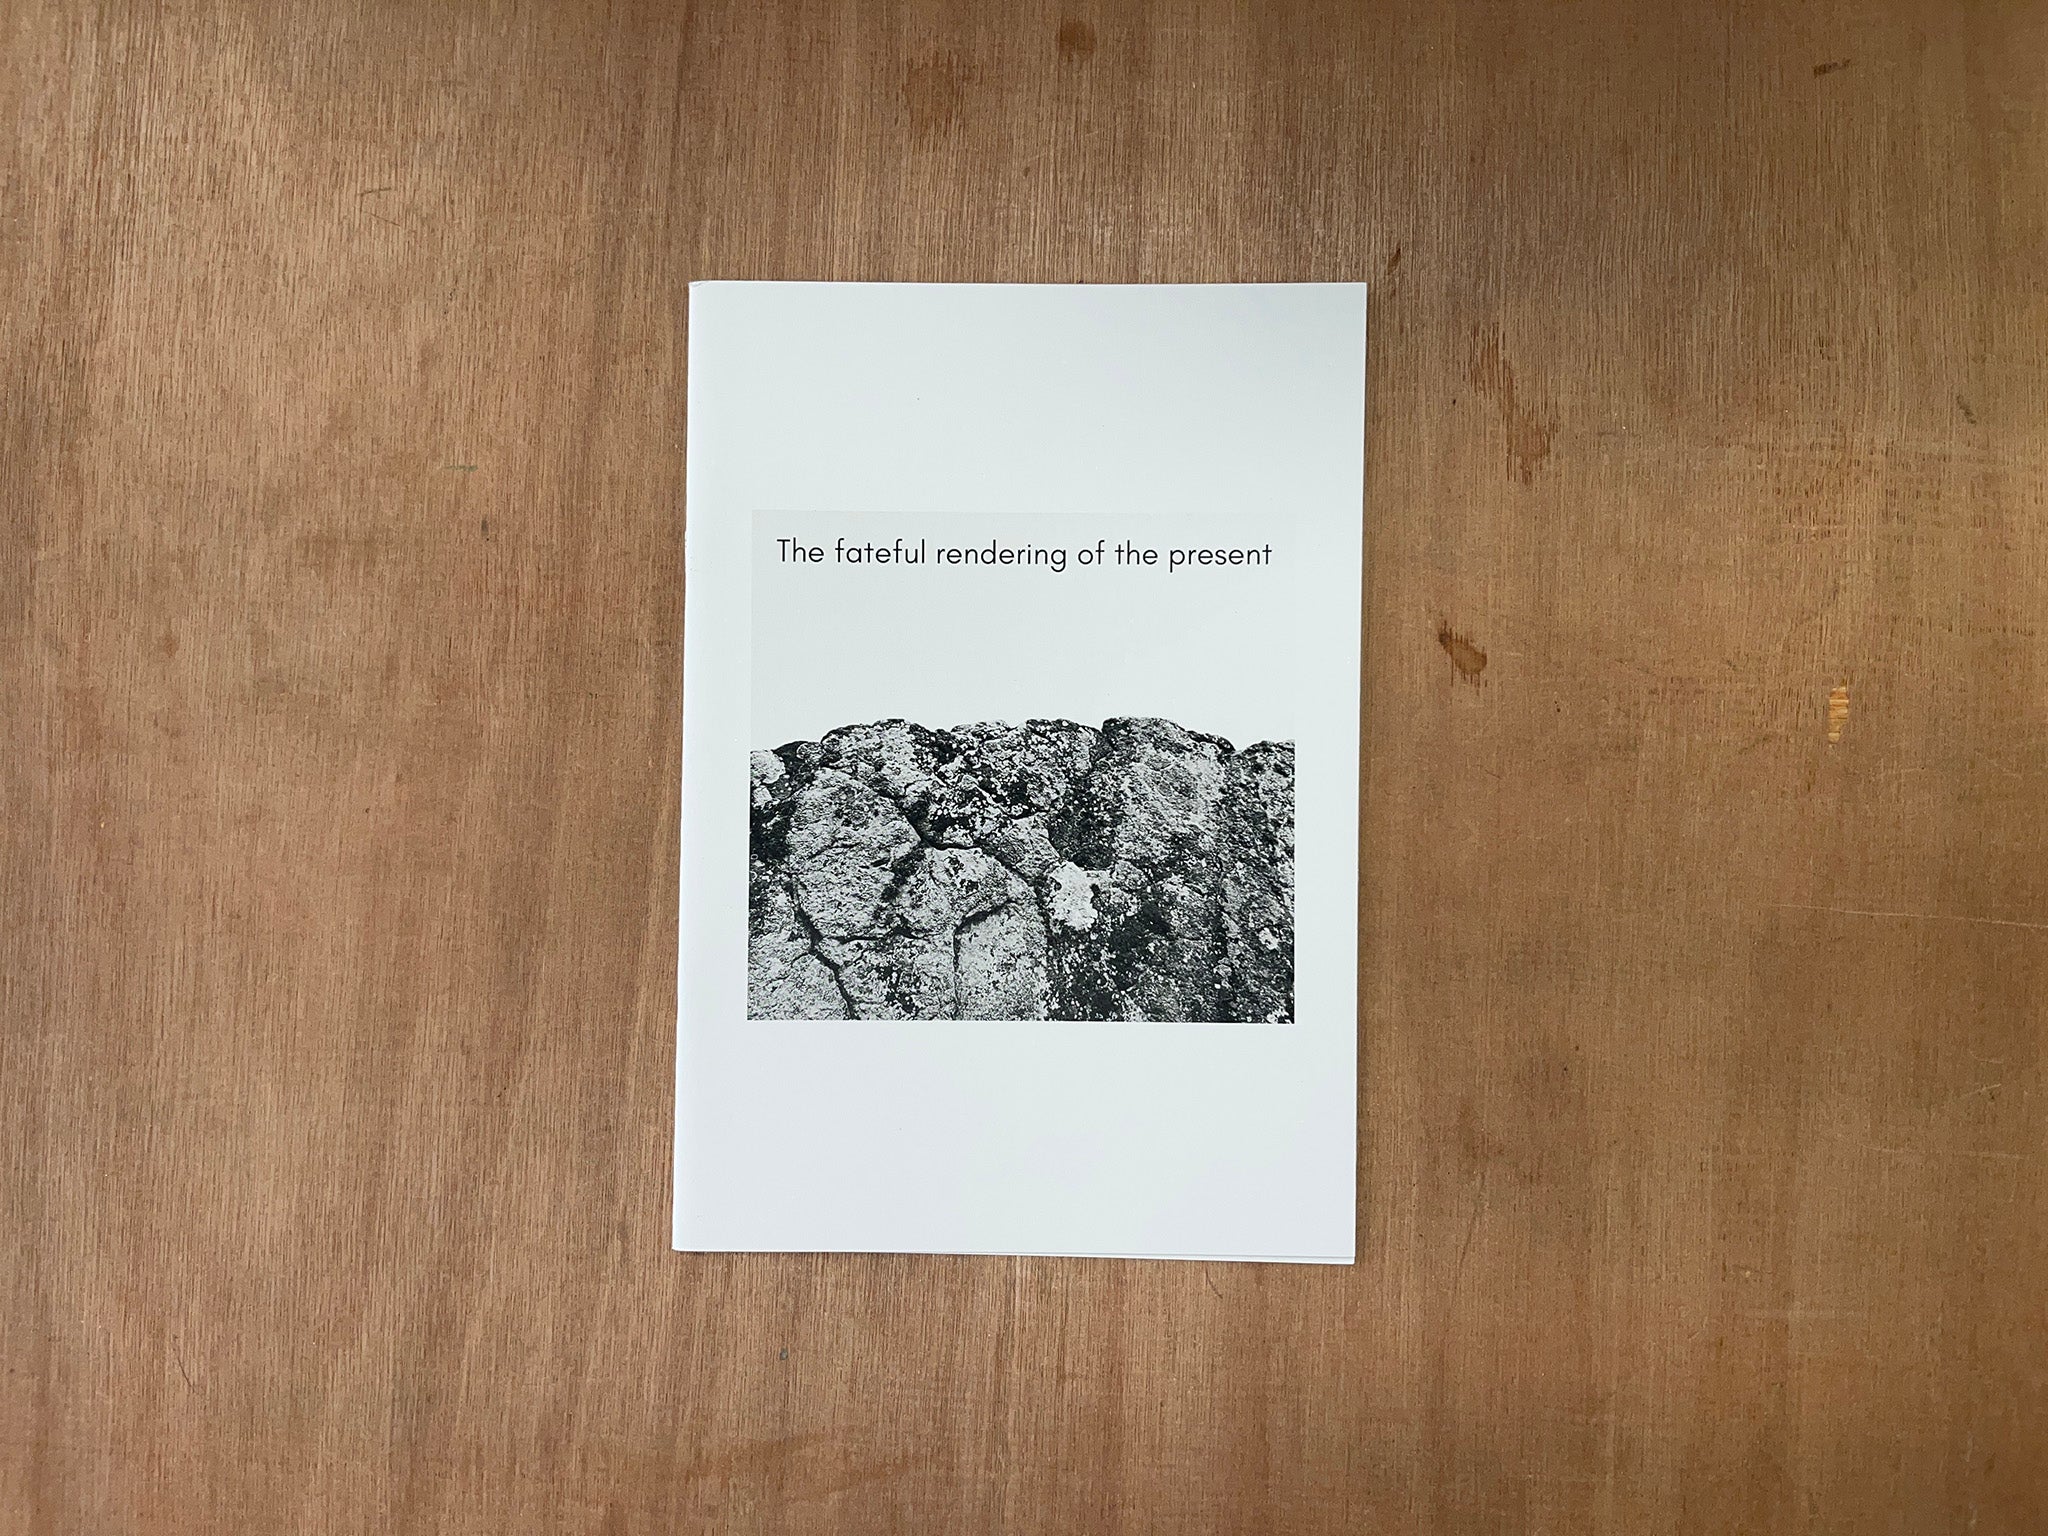 THE FATEFUL RENDERING OF THE PRESENT by Catherine Street & Ben Ewart-Dean